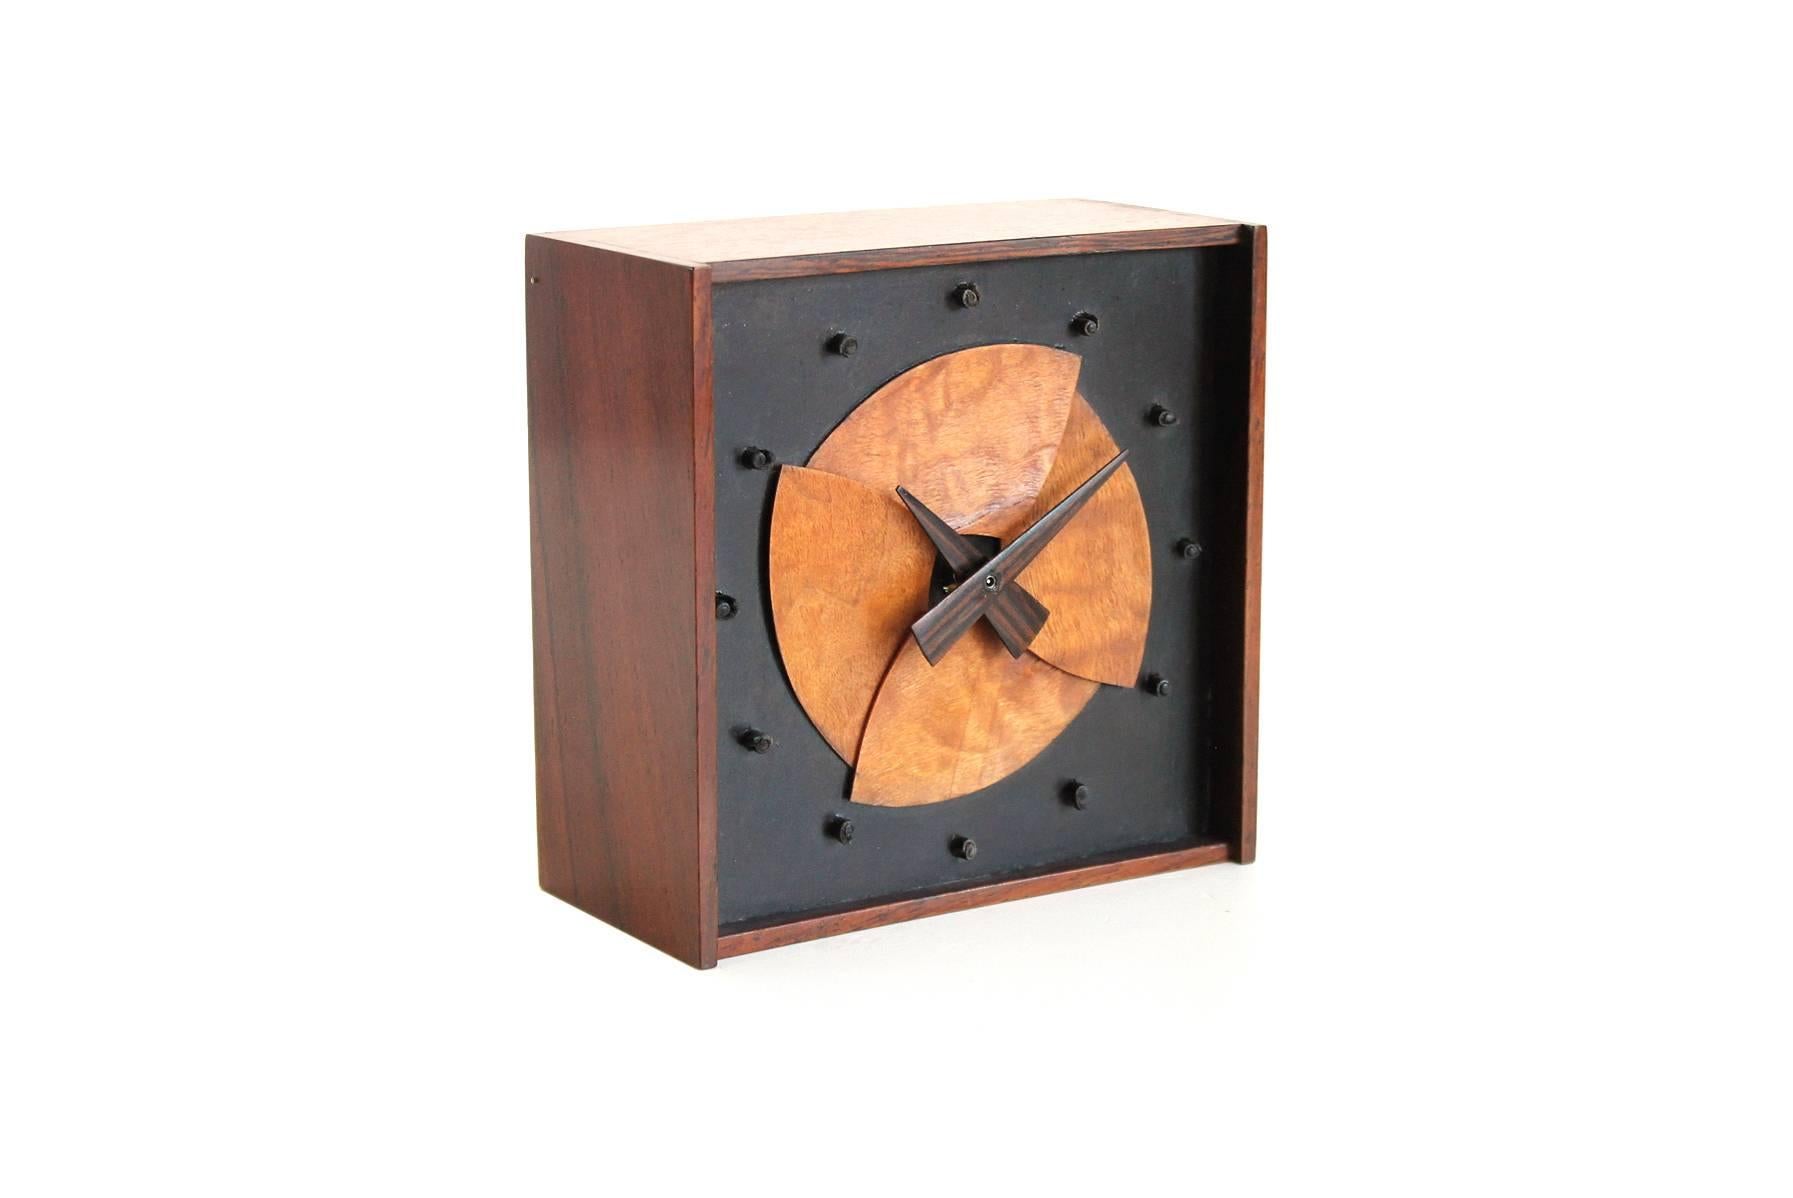 Table clock with mixed exotic woods by master woodworker and craftsman Jere Osgood. Pound bent-stave laminated wood face made of maple, with rosewood case and hands and leather hour markers. Only 8 of these were produced. Battery powered.